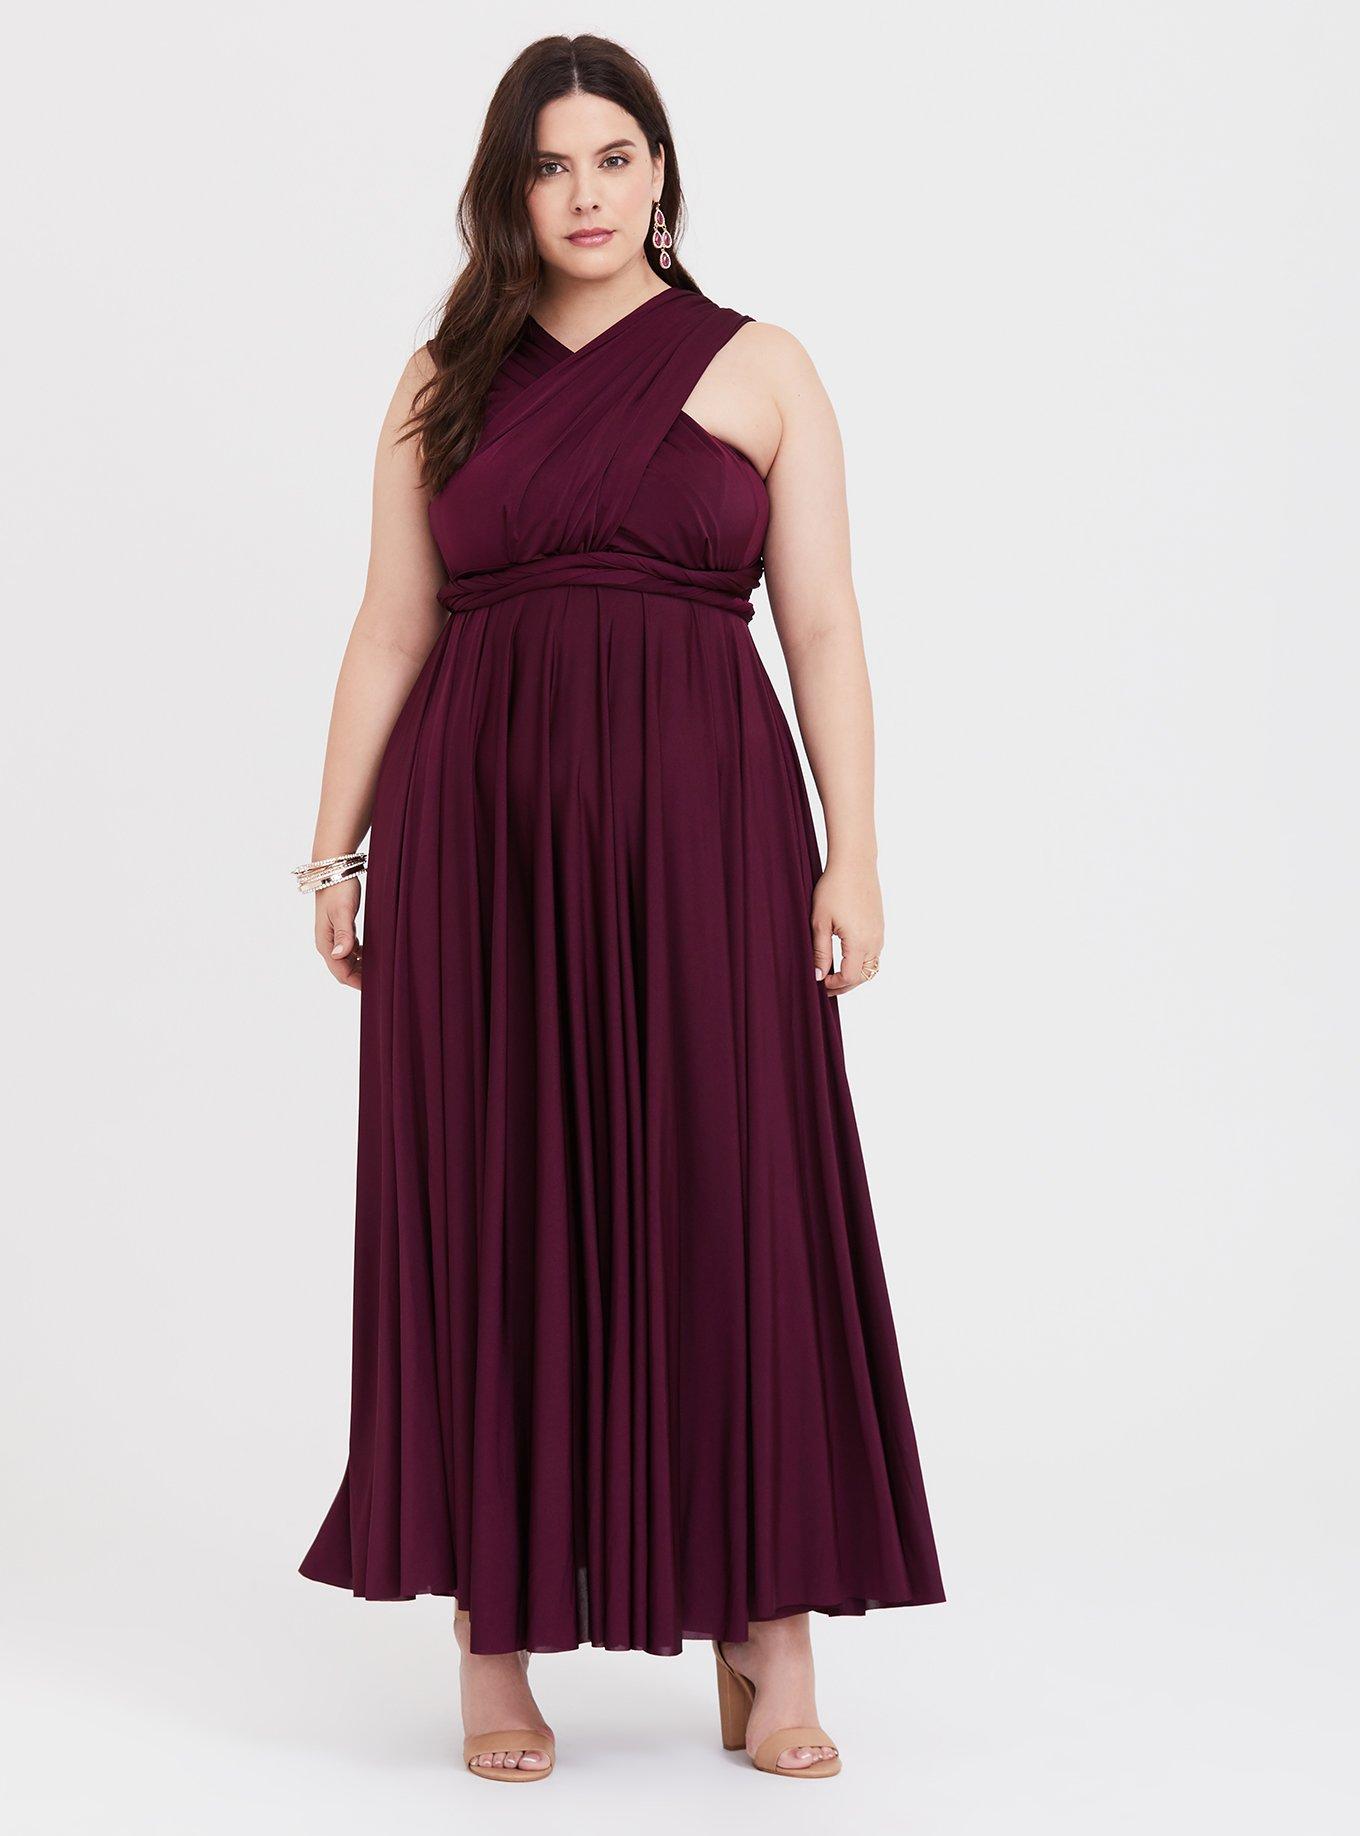 Plus Size - Special Occasion Burgundy Shiny Knit Convertible Maxi Dress -  Torrid